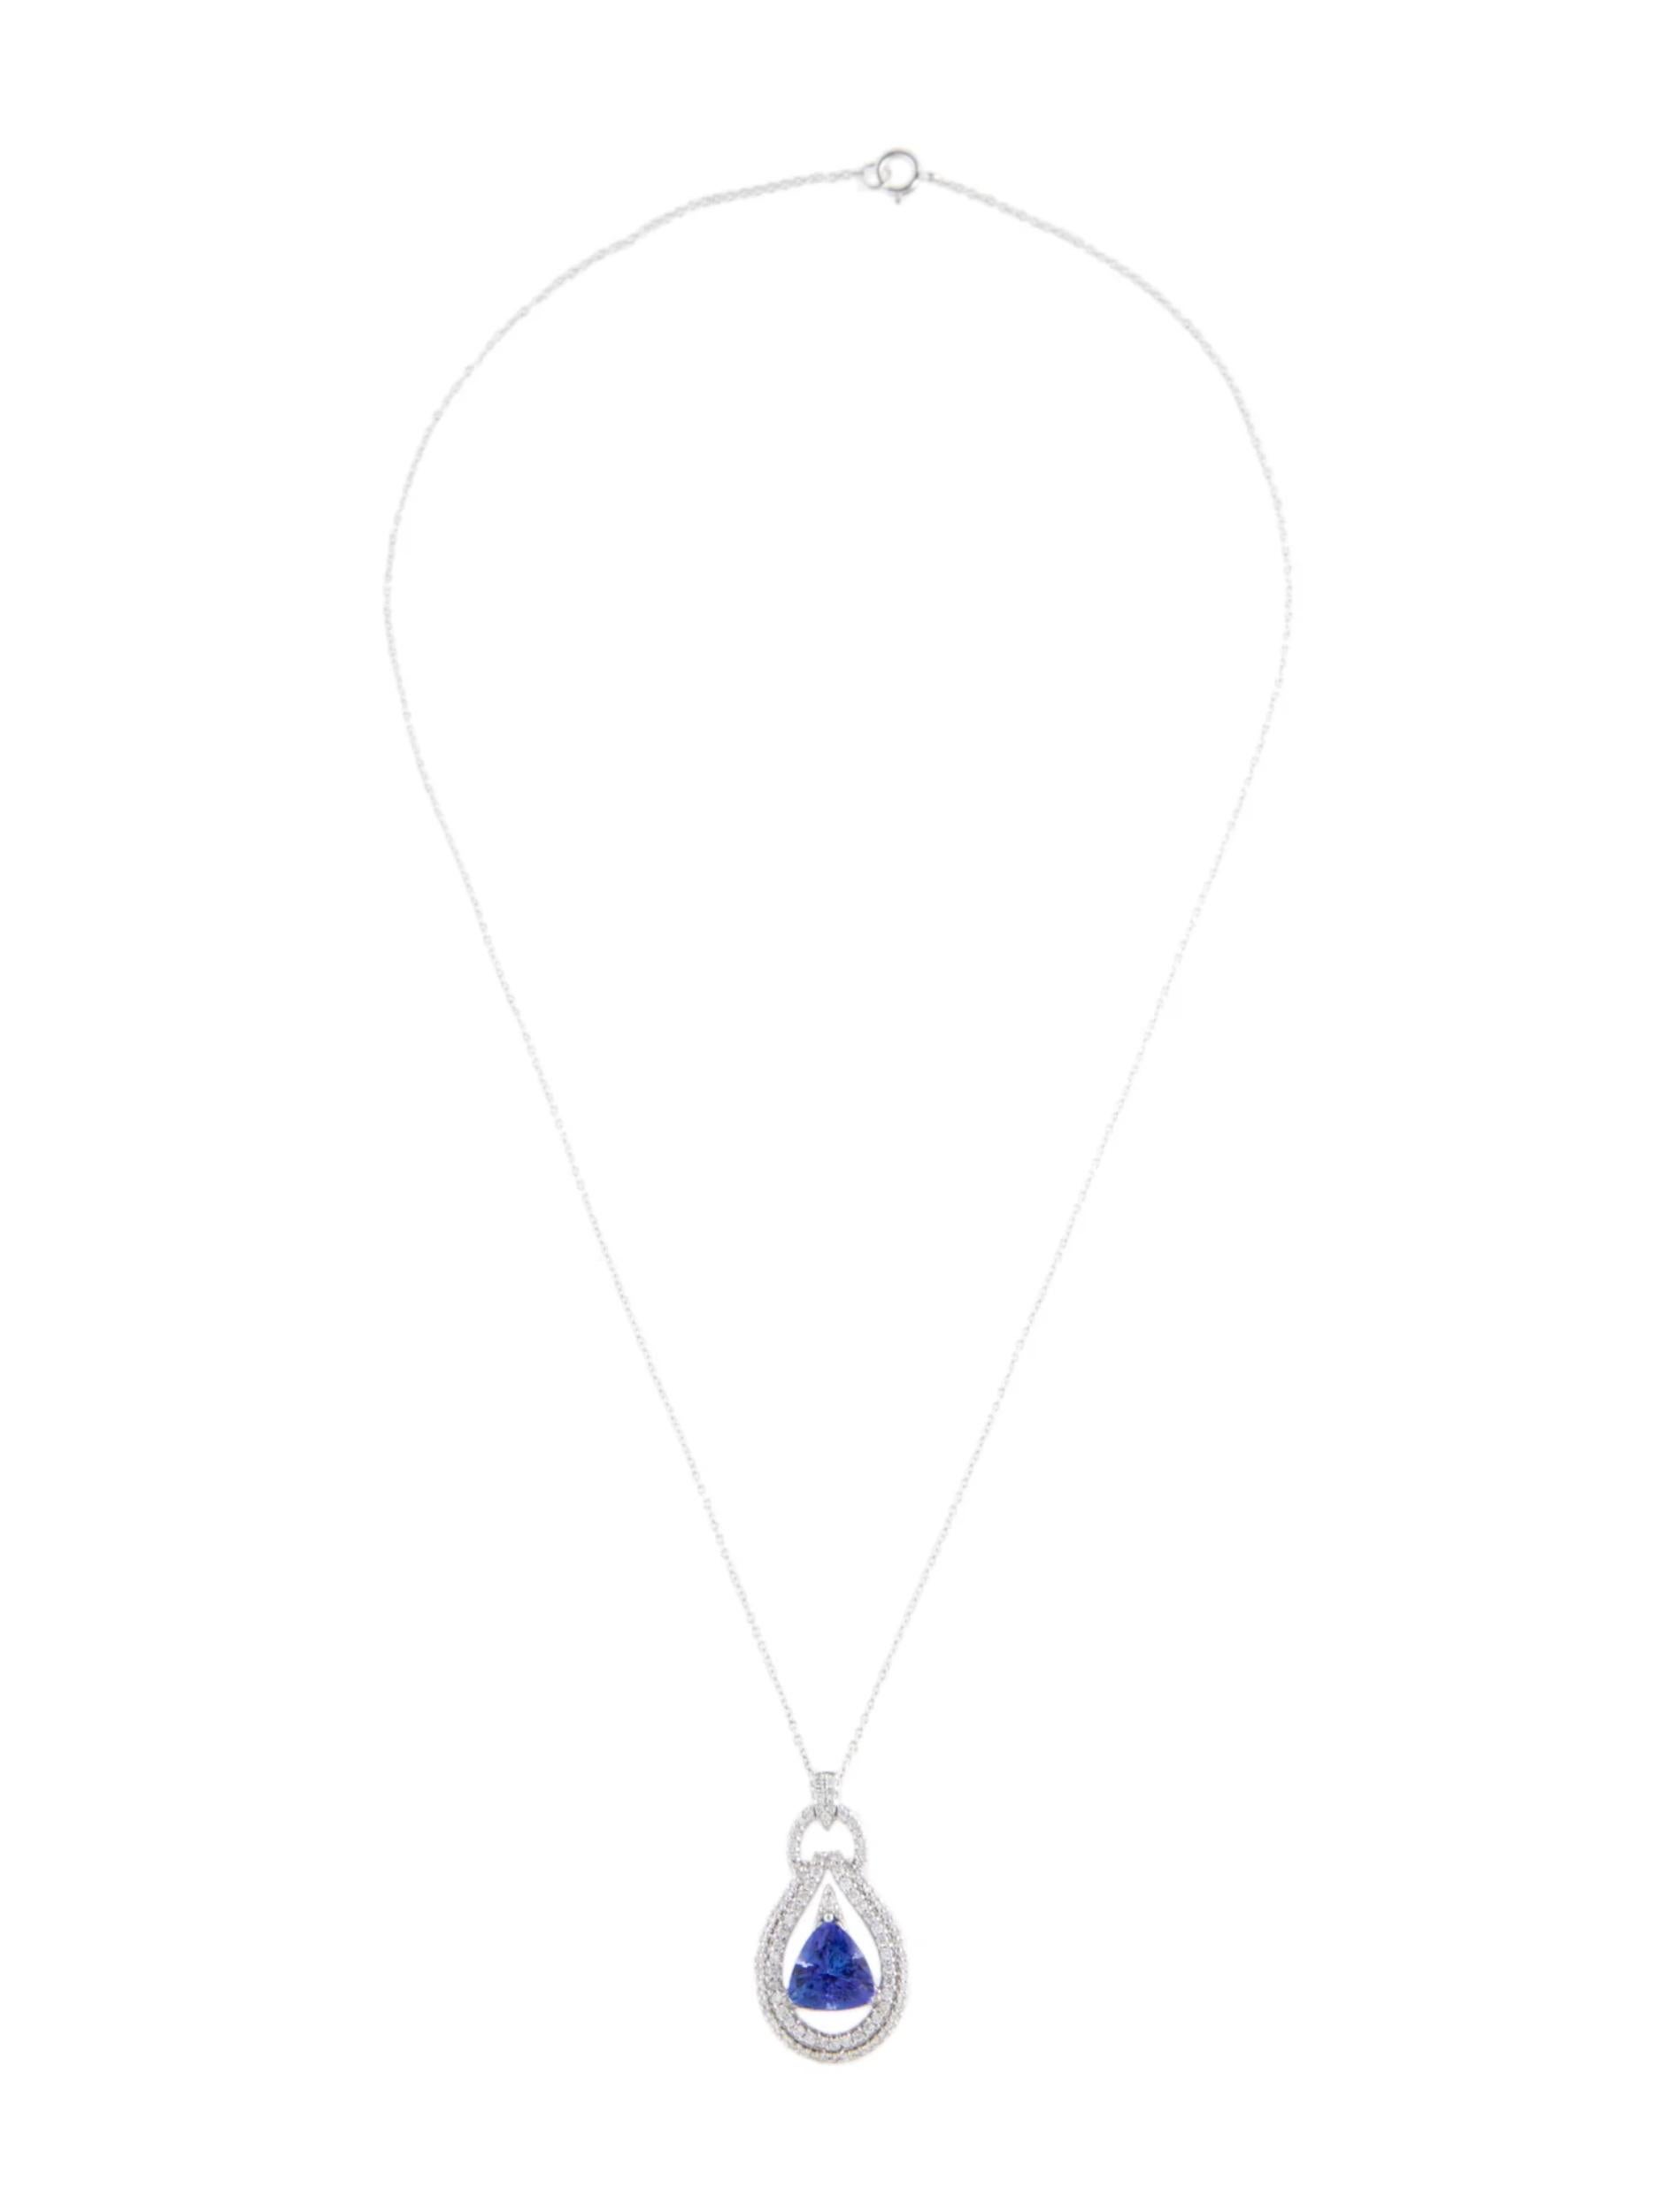 Luxury 14K Tanzanite & Diamond Pendant Necklace  Exquisite & Timeless Jewelry In New Condition For Sale In Holtsville, NY